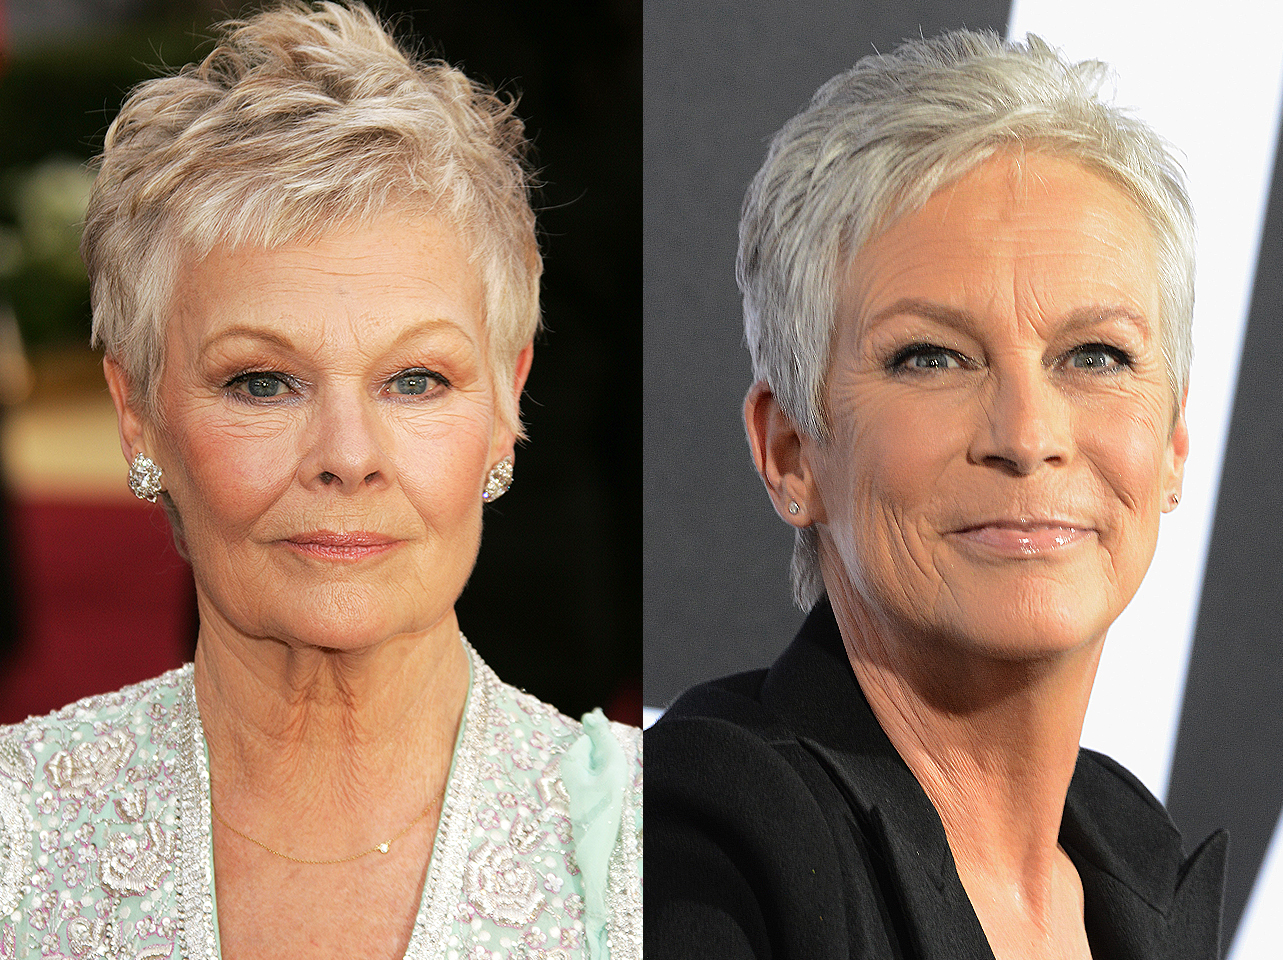 Judi Dench and Jamie Lee Curtis | Source: Getty Images